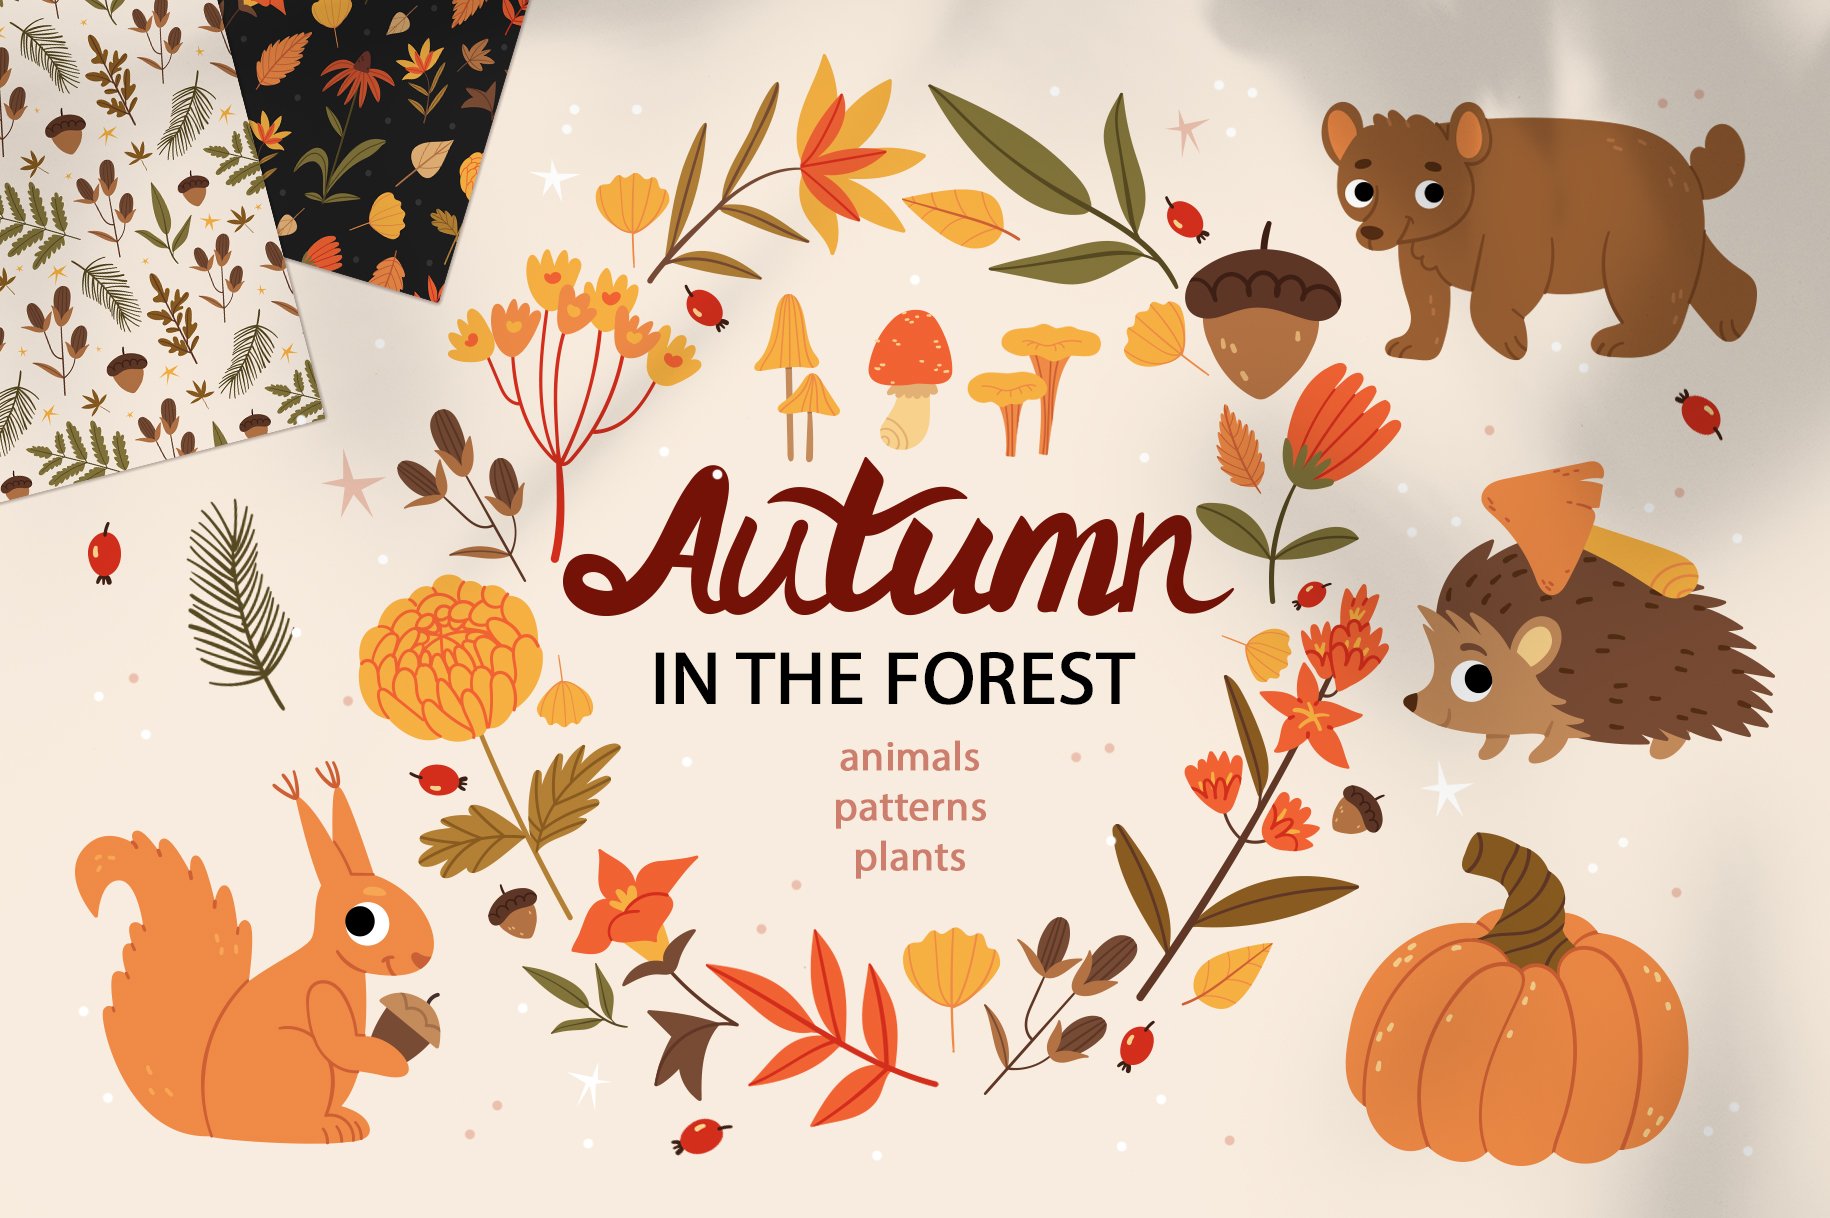 Autumn in the forest cover image.